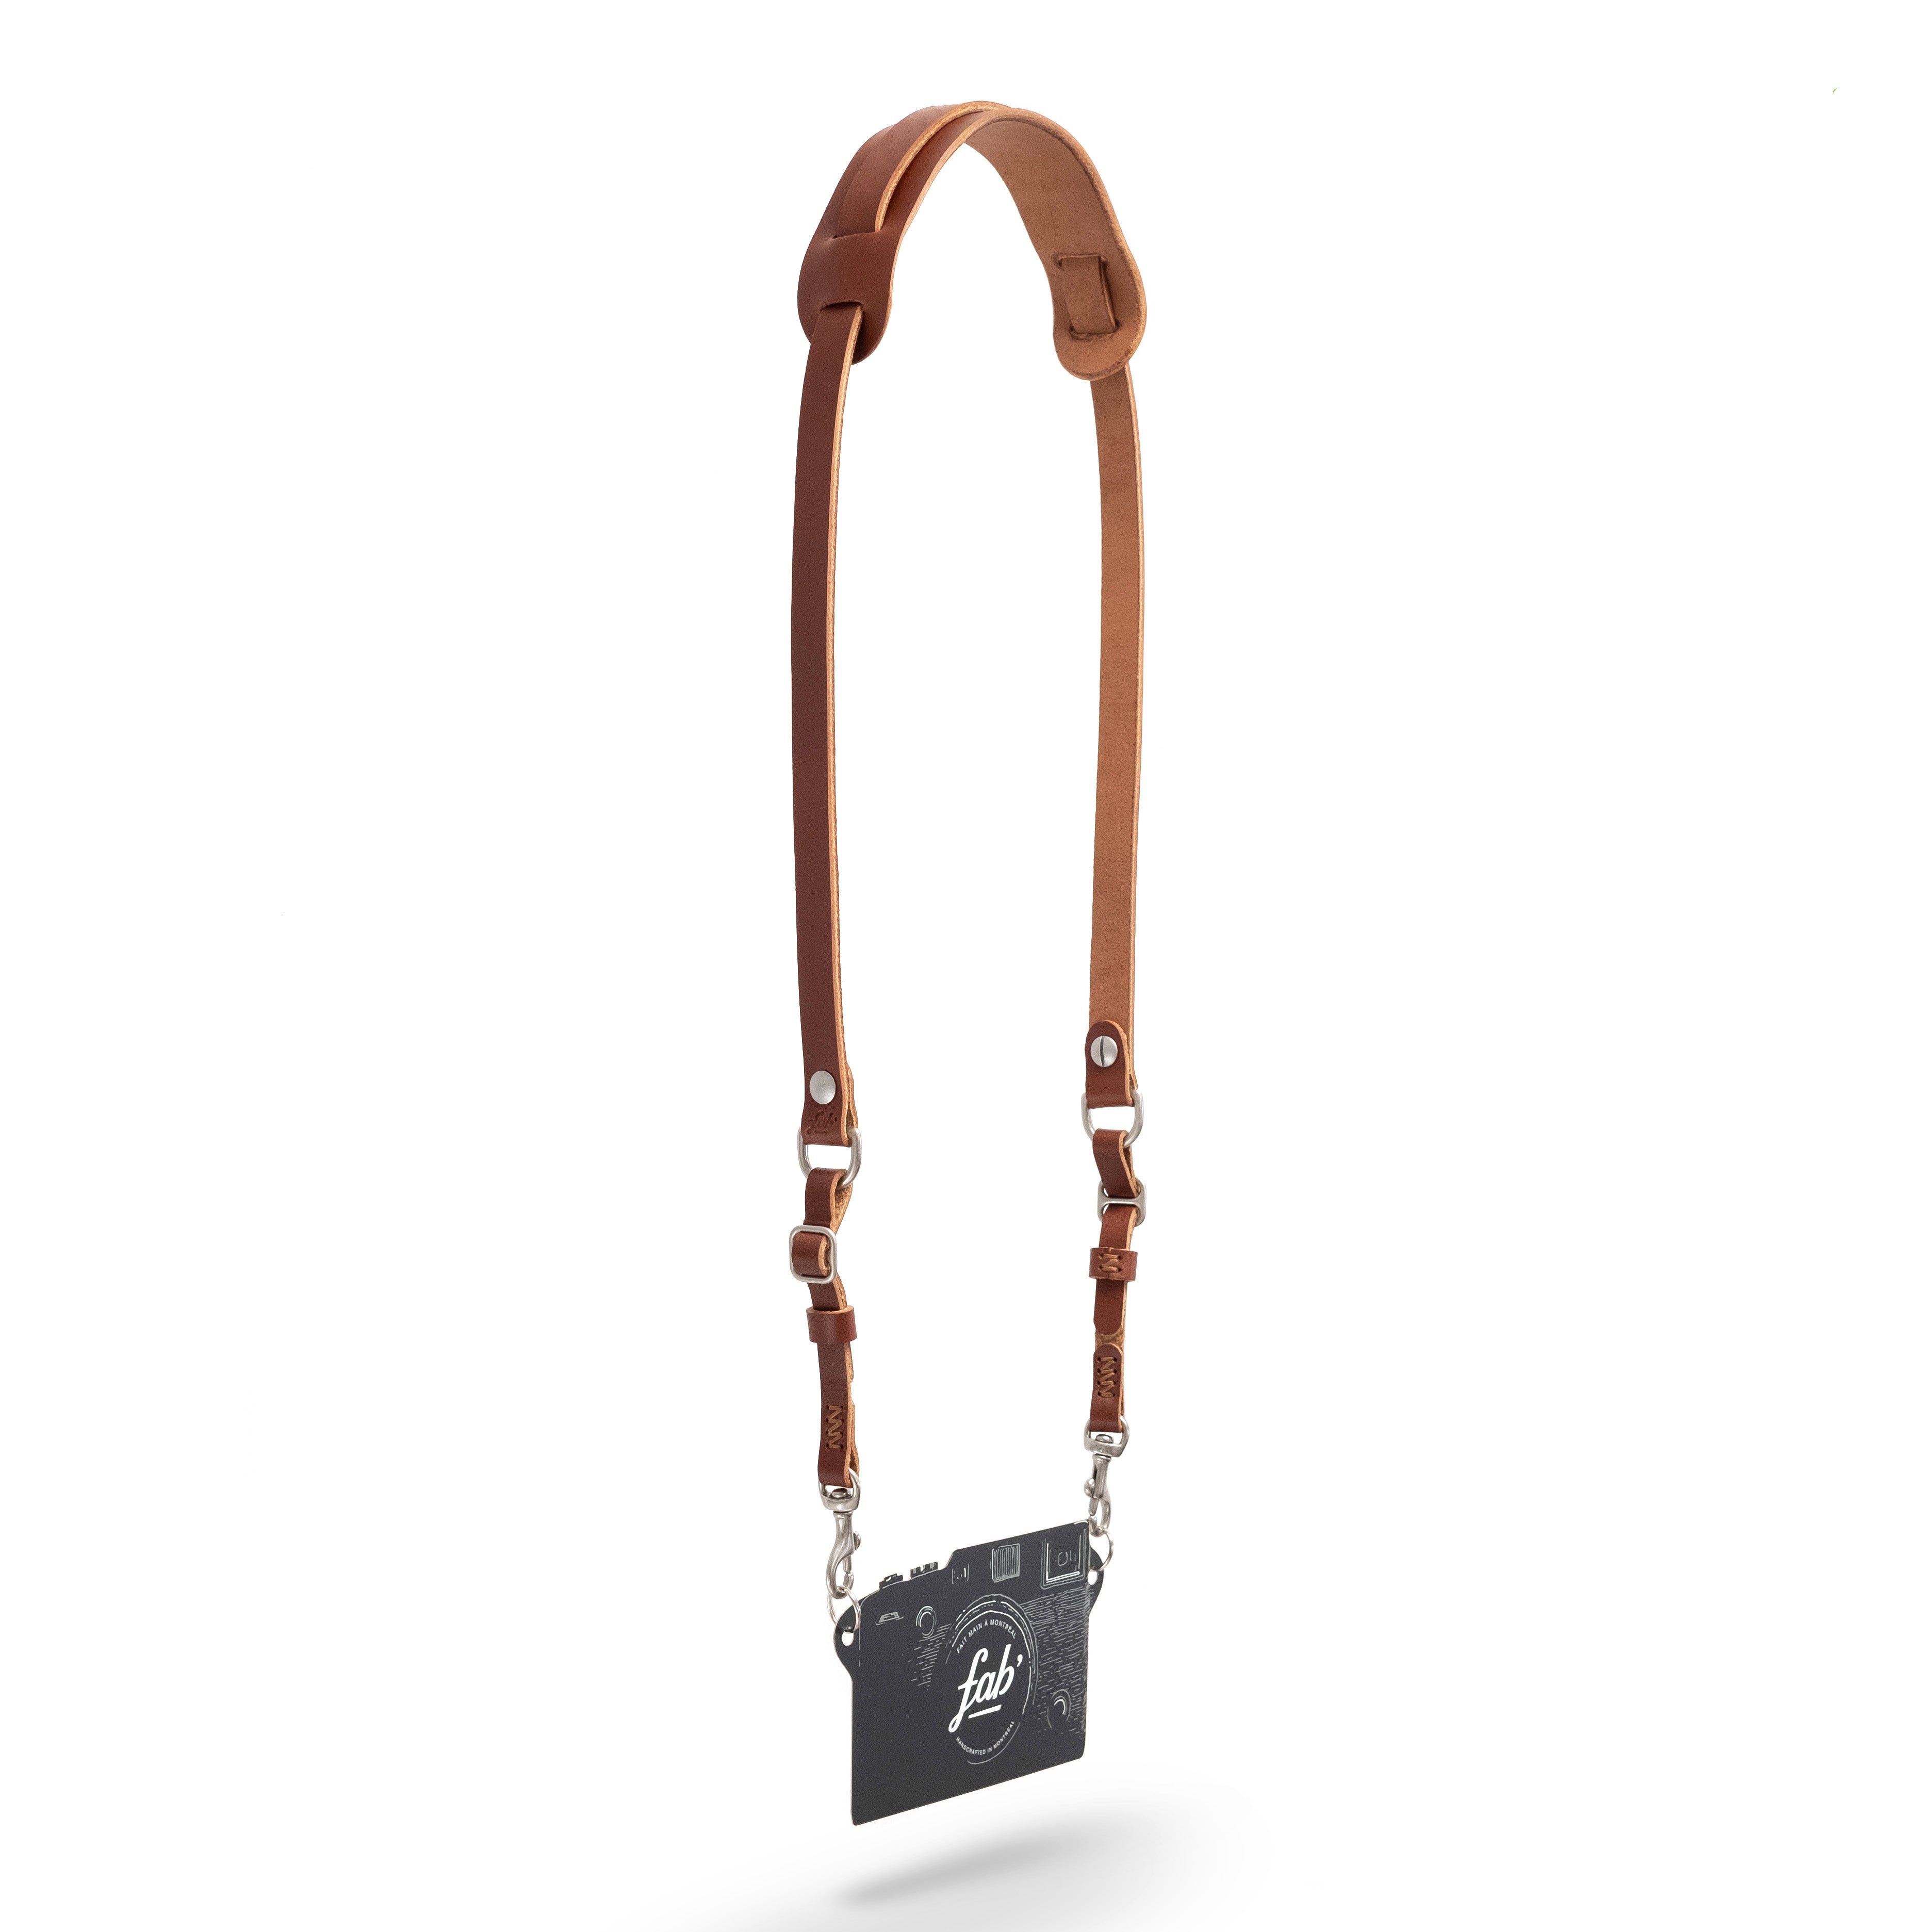 Fab' F11 strap - Brown leather - Size S (39")